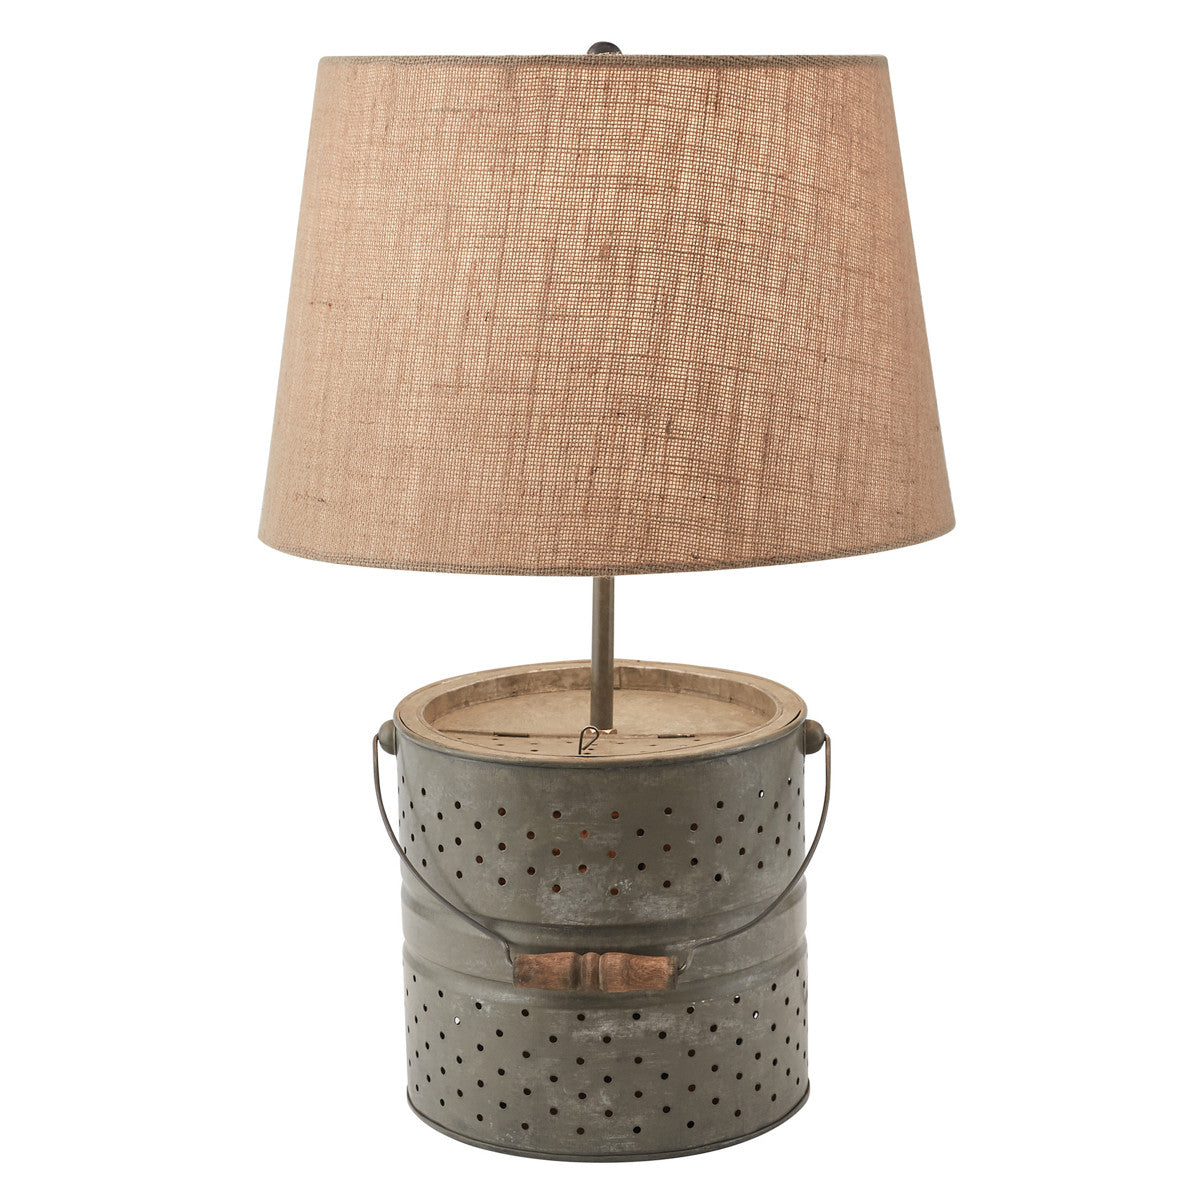 Bait Bucket Lamp With Shade - Park Designs